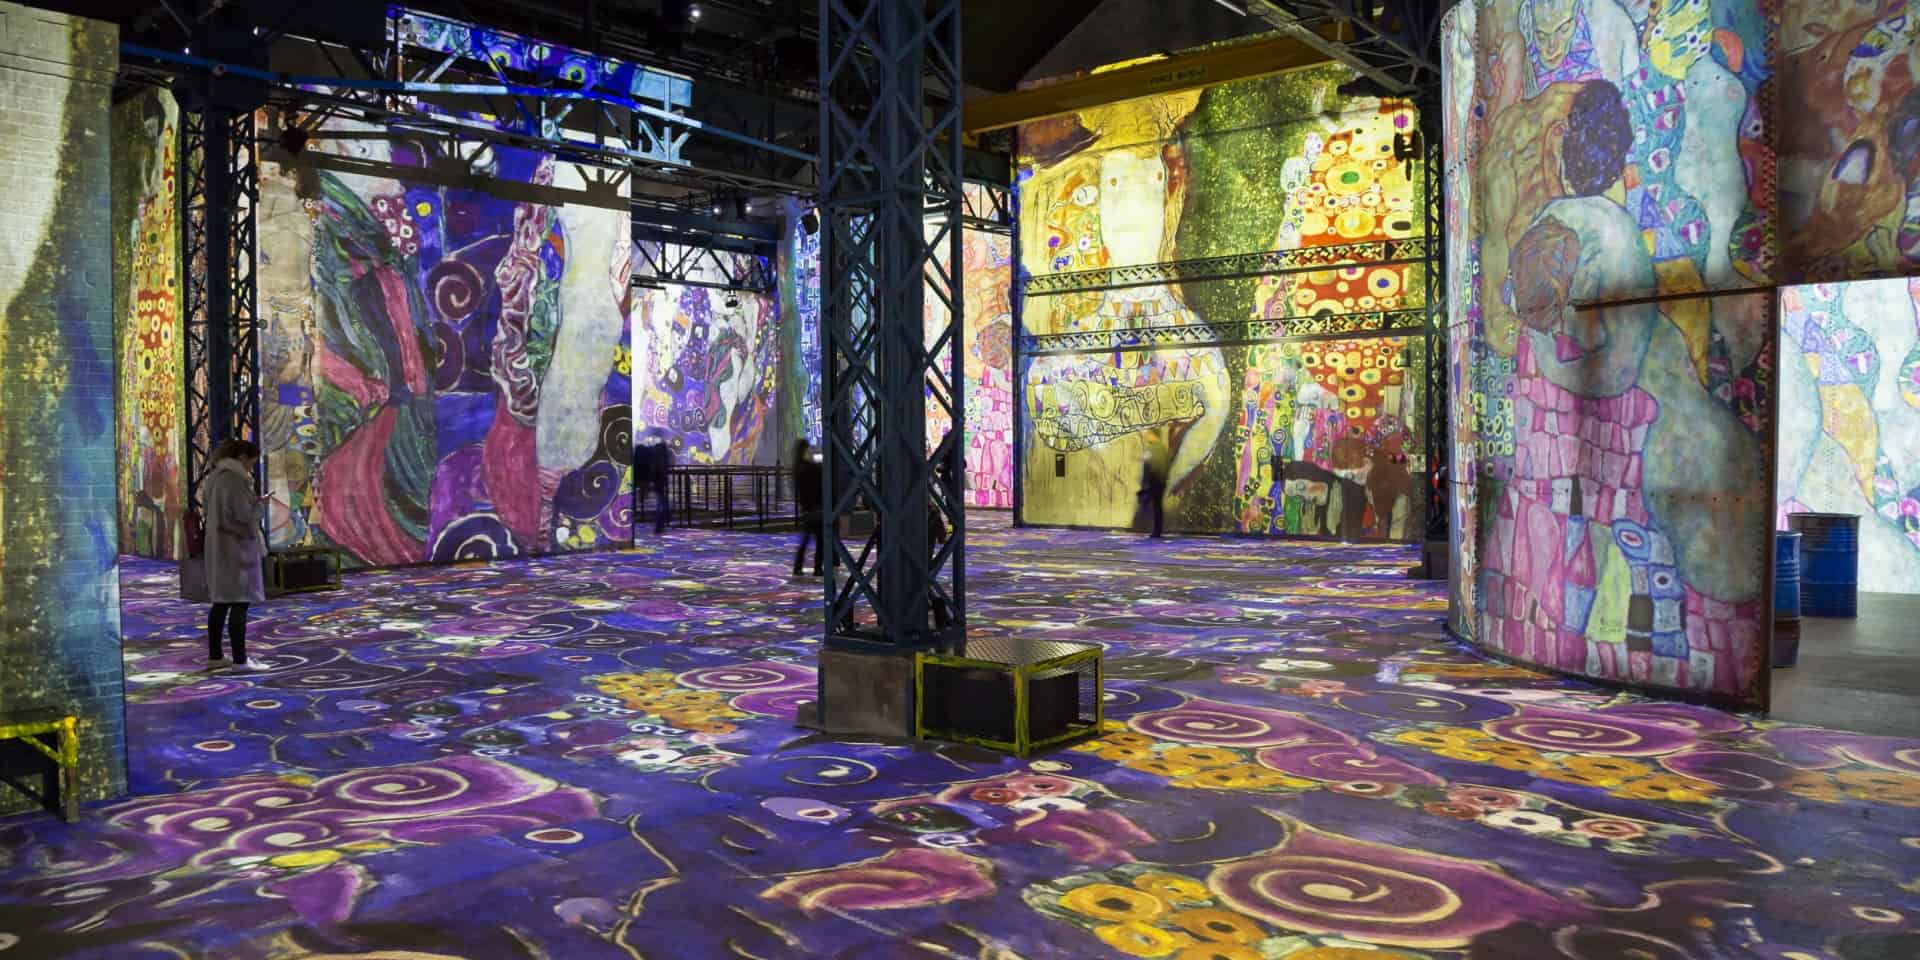 Digital Paris museum the Ateliers des Lumieres opened with a light and sound show of Gustav Klimt's work.